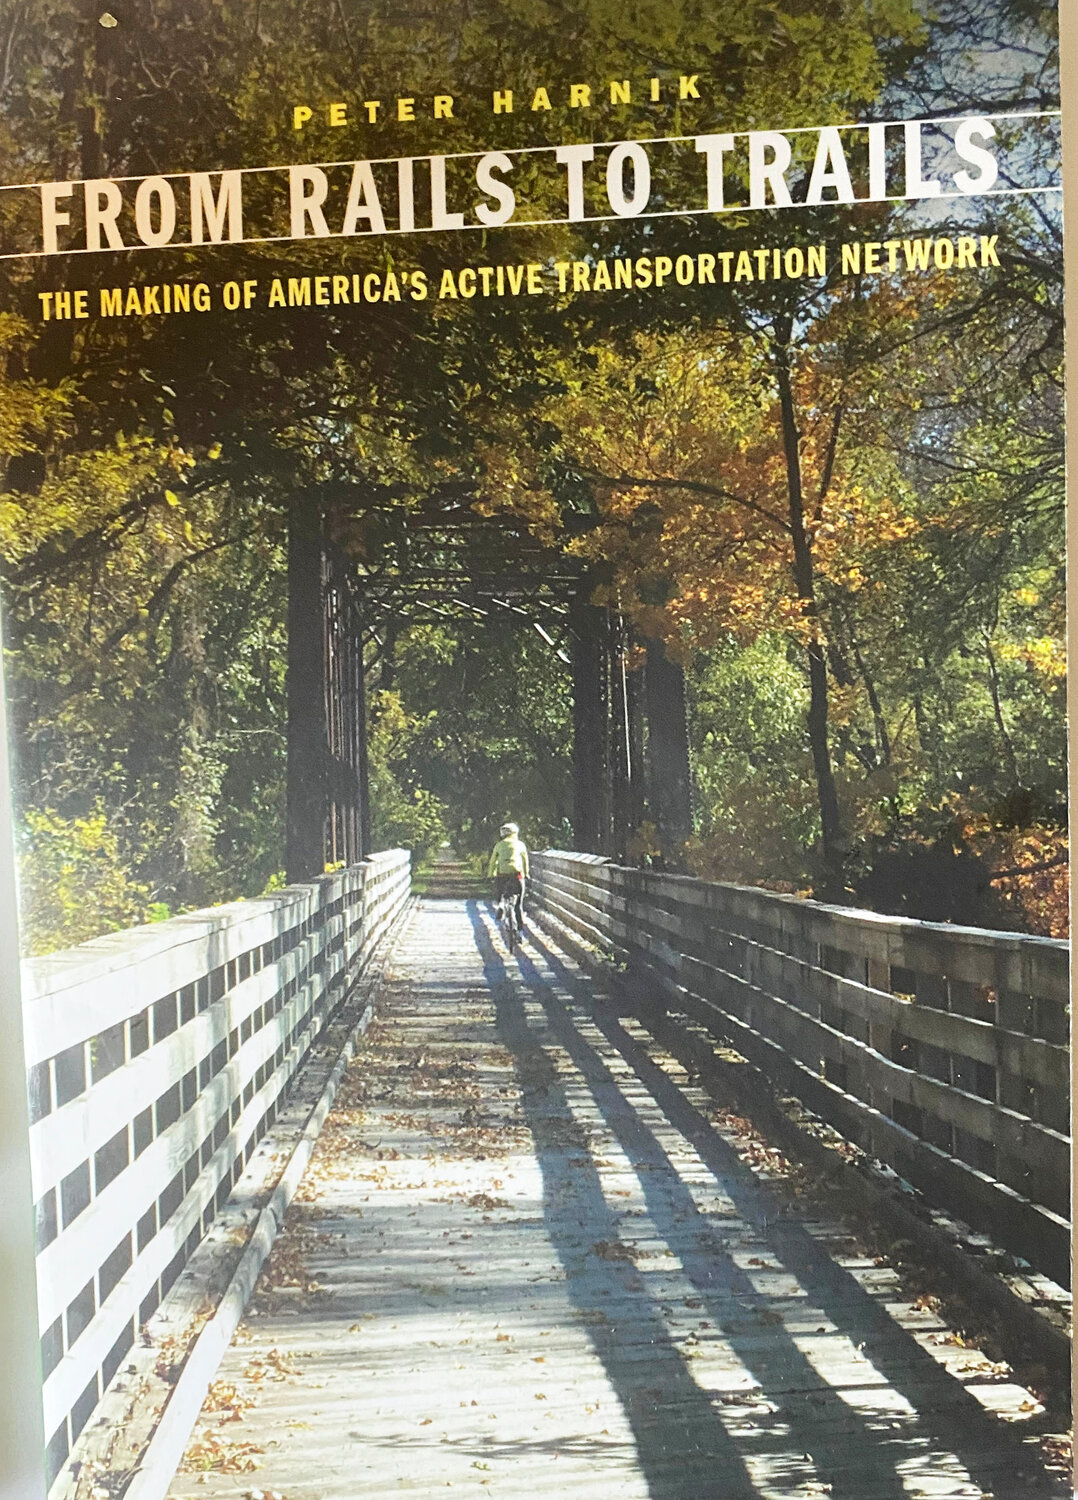 The cover of Peter Harnik's paperback edition of "From Rails To Trails."